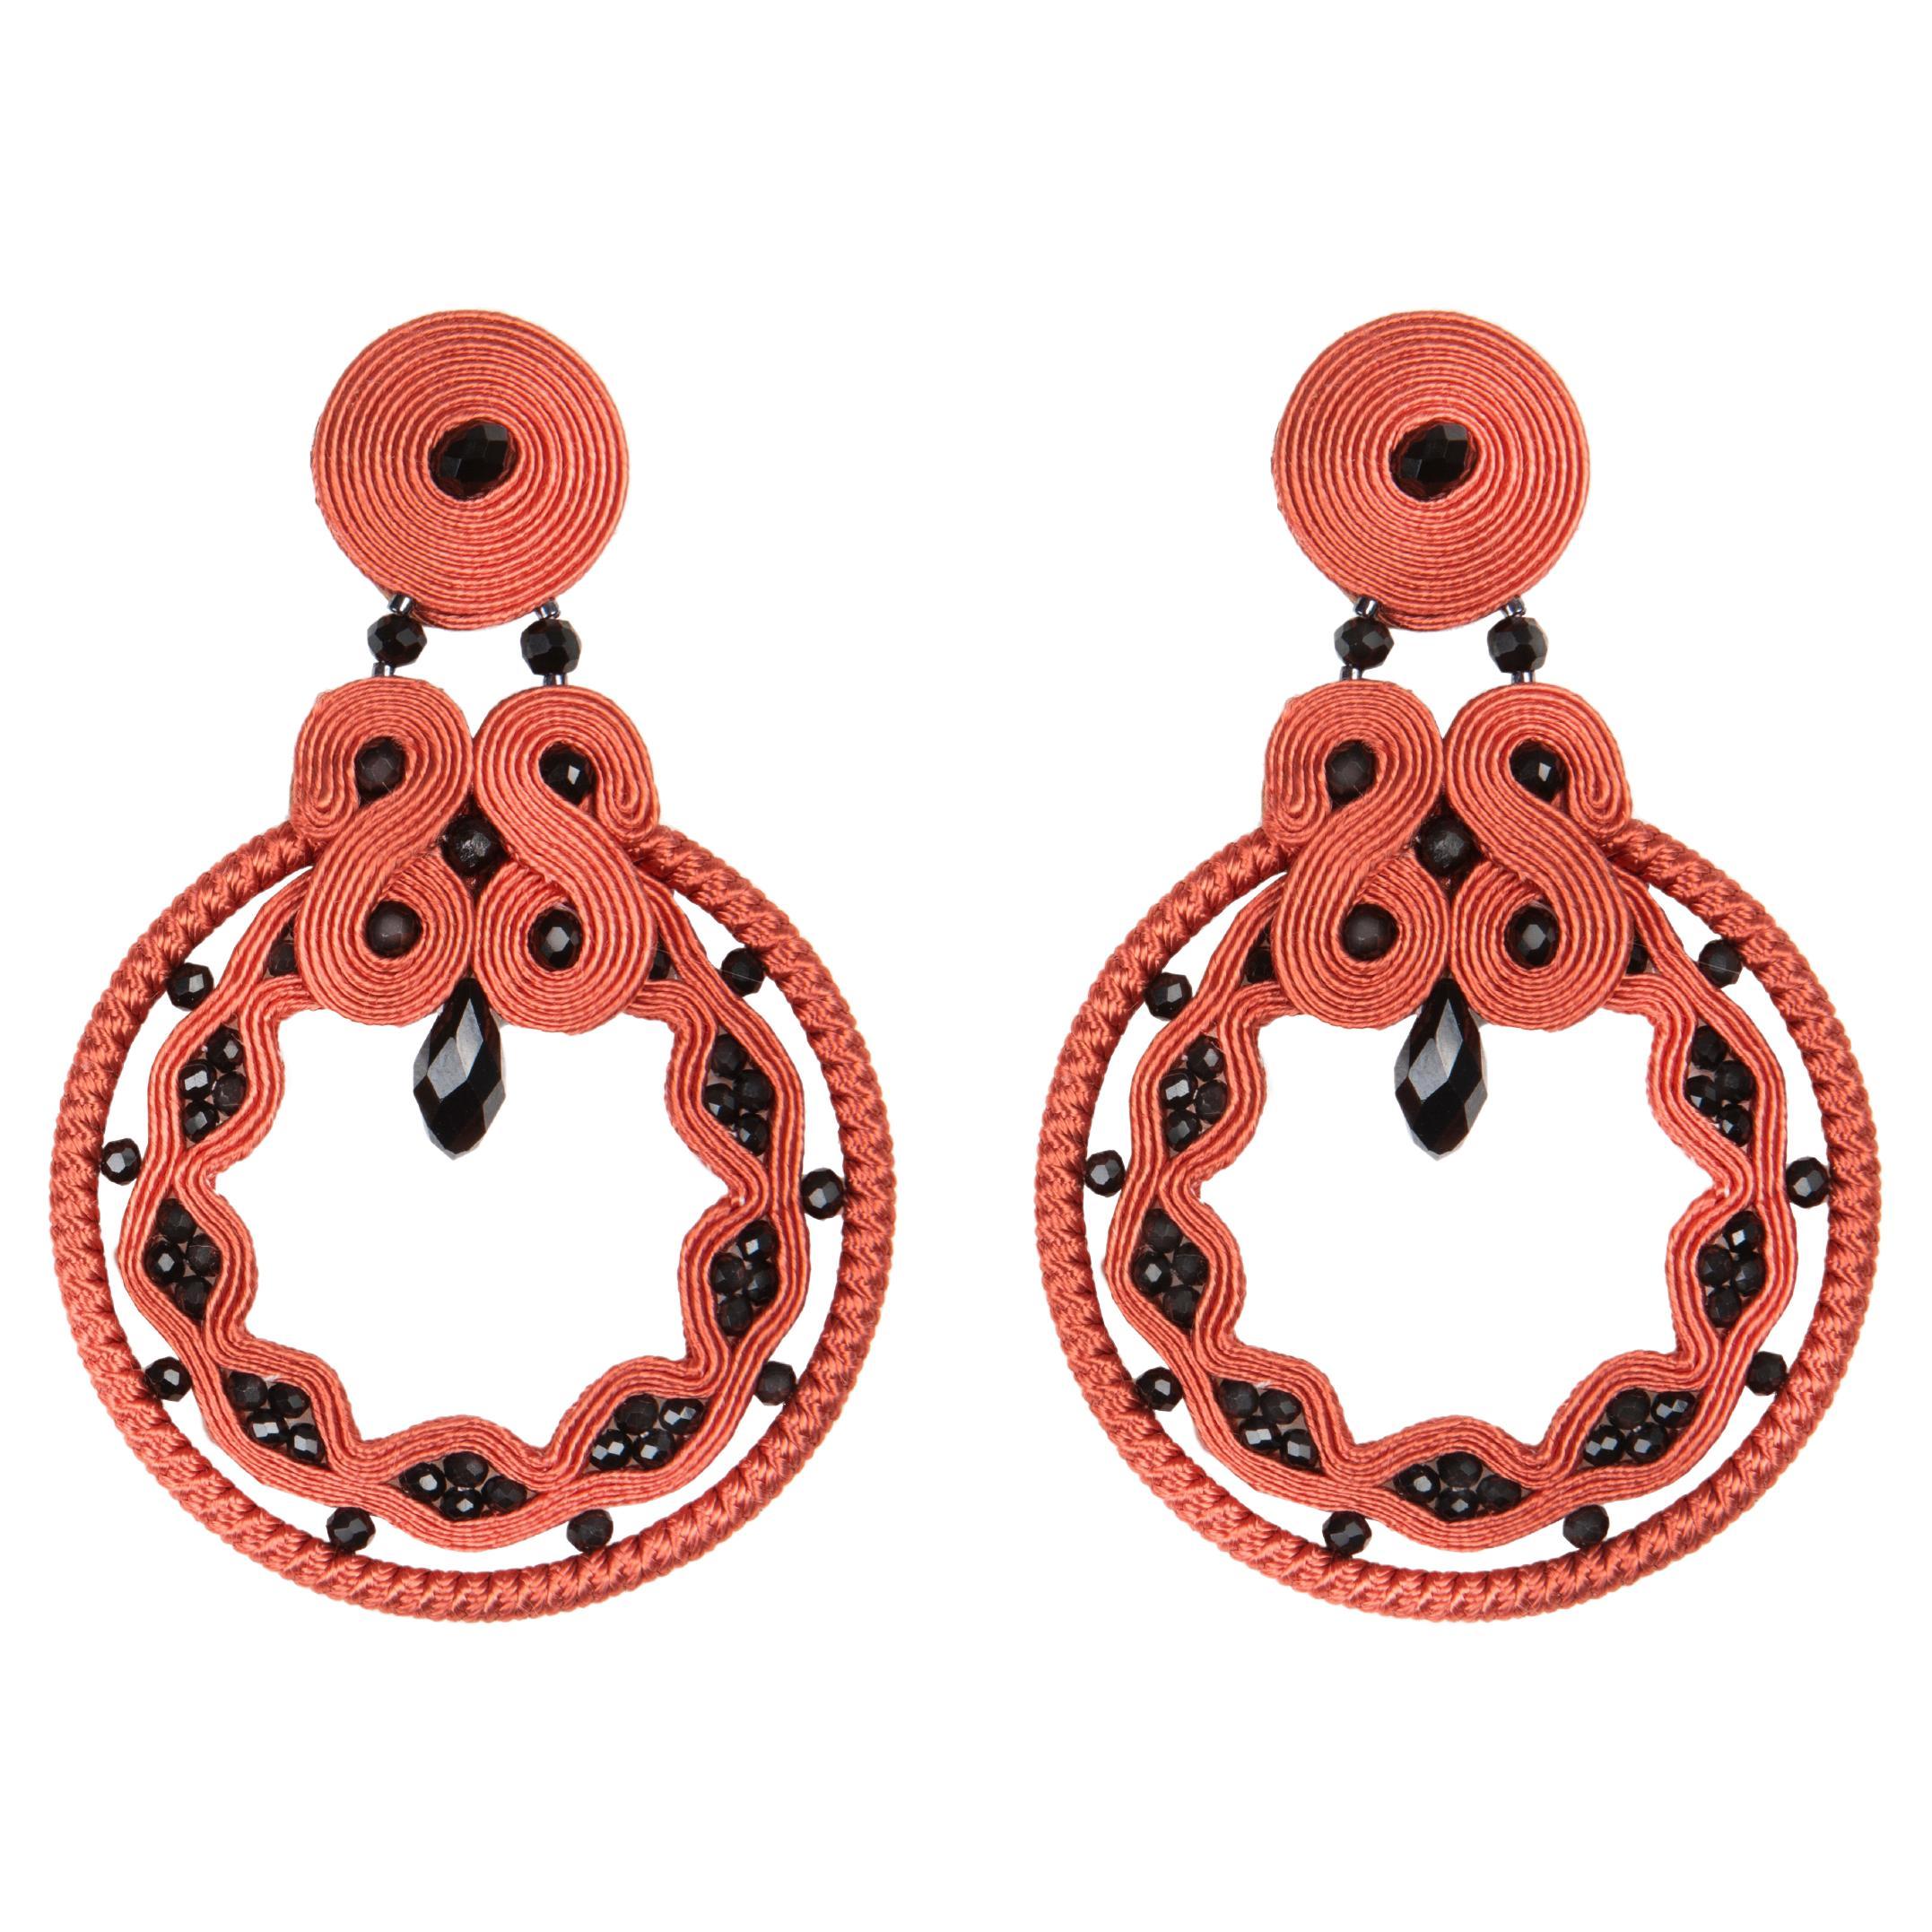  Miabril Coral & Jet Soutache Earrings with Silk Rayon, Beads & Silver Closure